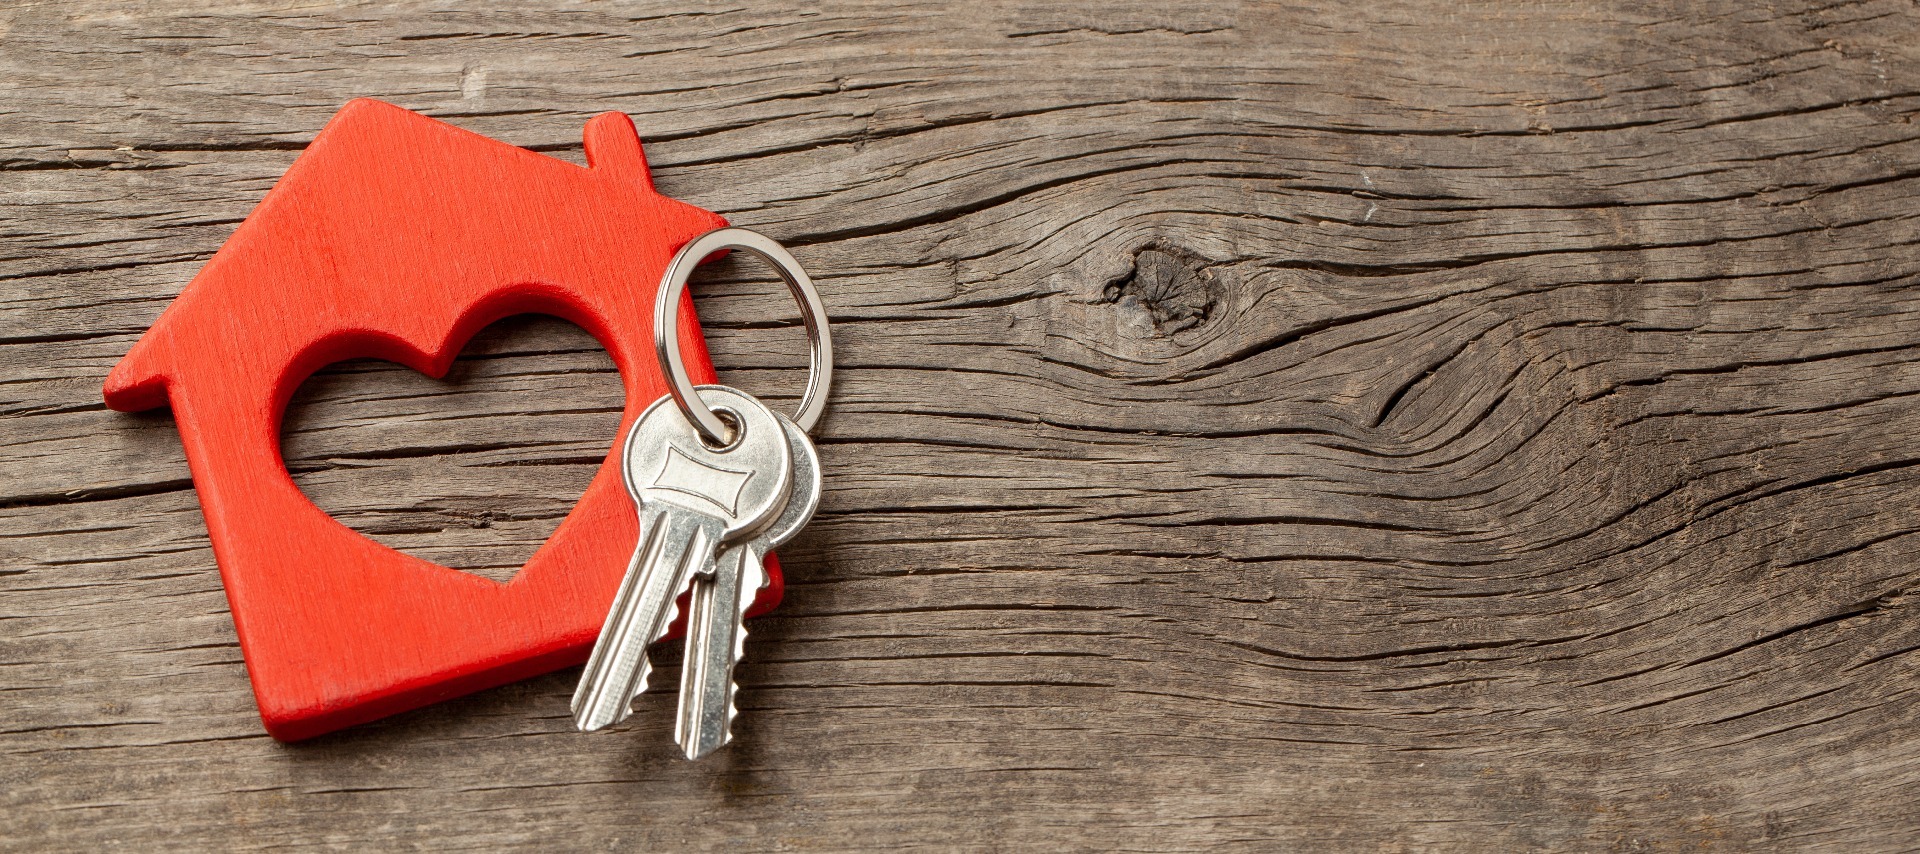 A set of house keys on a red, wooden house shape, with a heart cut out of the centre; our Conveyancing Solicitors in Garstang are here to assist with your house sale or purchase.